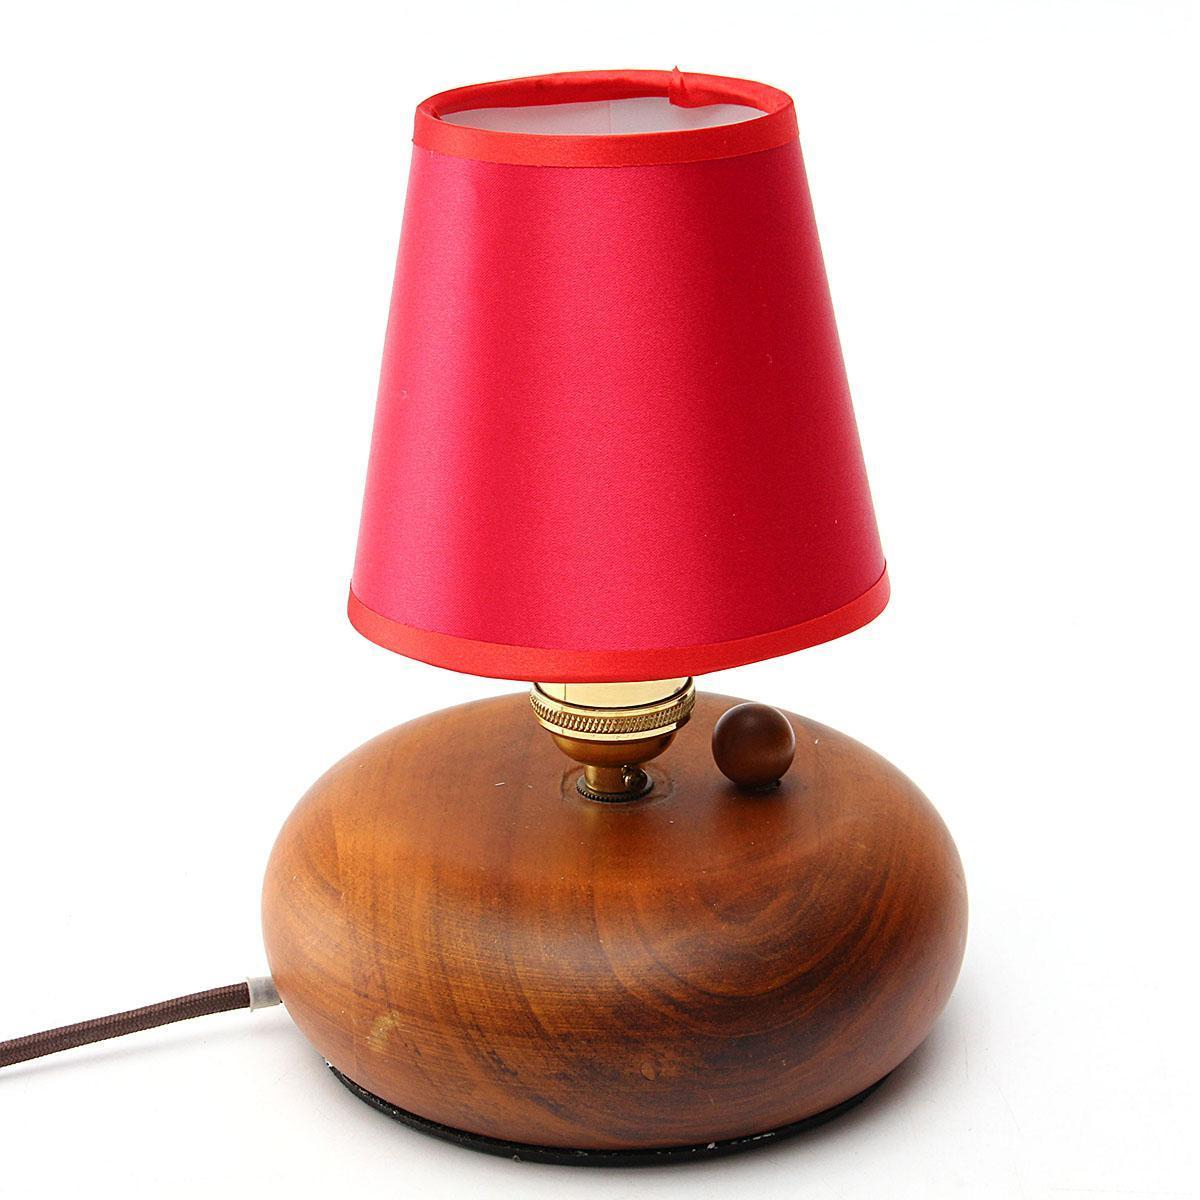 Fabric Chandelier Lampshade Holder Clip On Sconce Bedroom Beside Bed Lamp Light Red throughout proportions 1200 X 1200